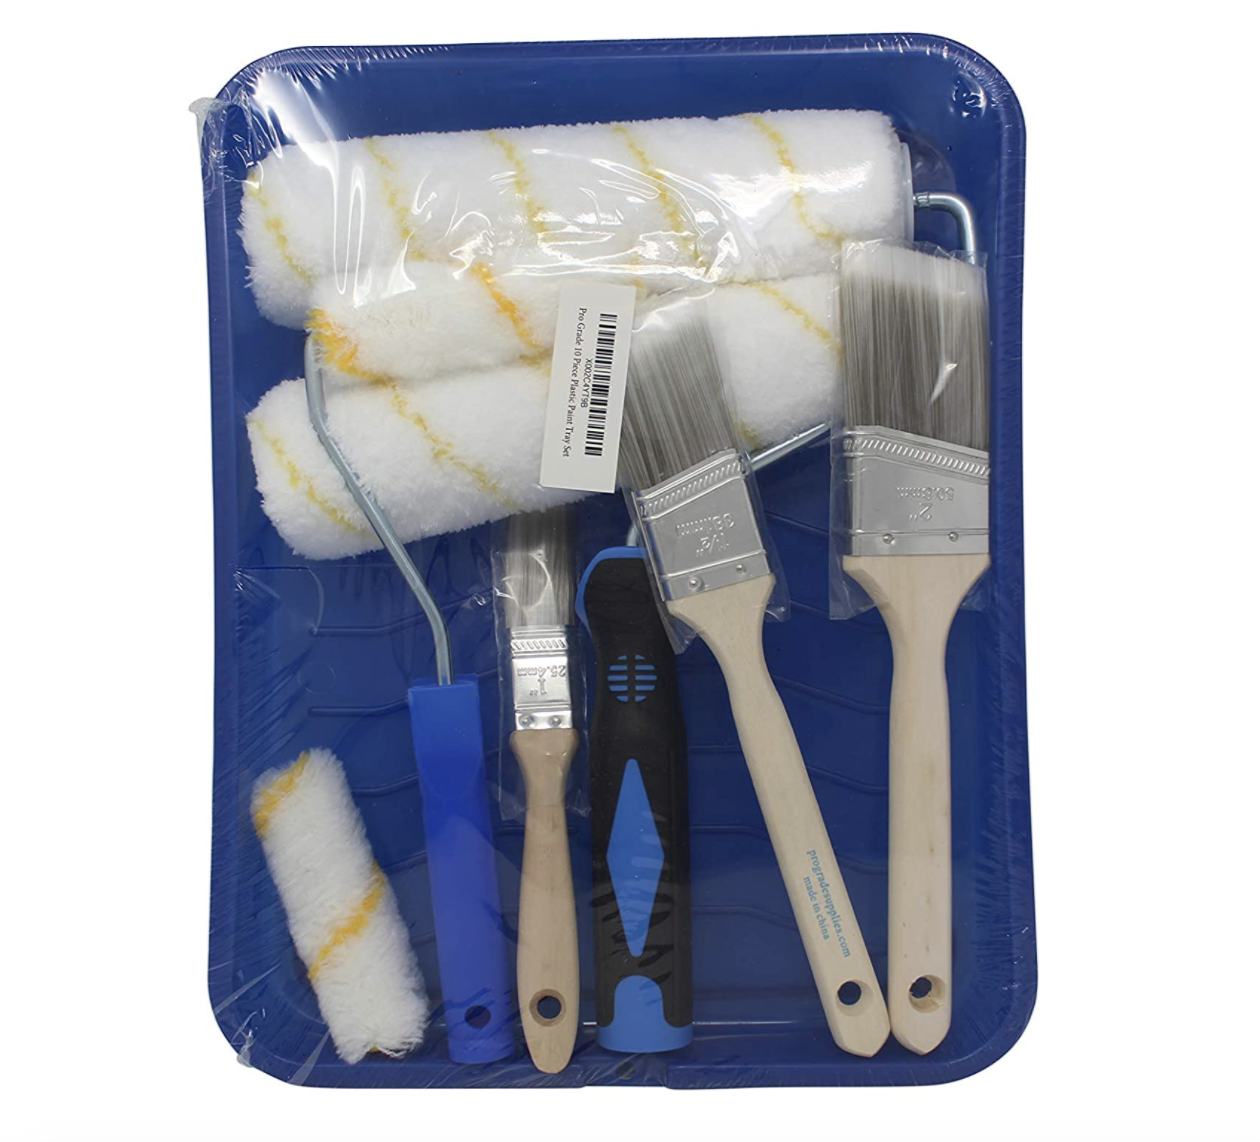 the complete pro grade paint roller cover set